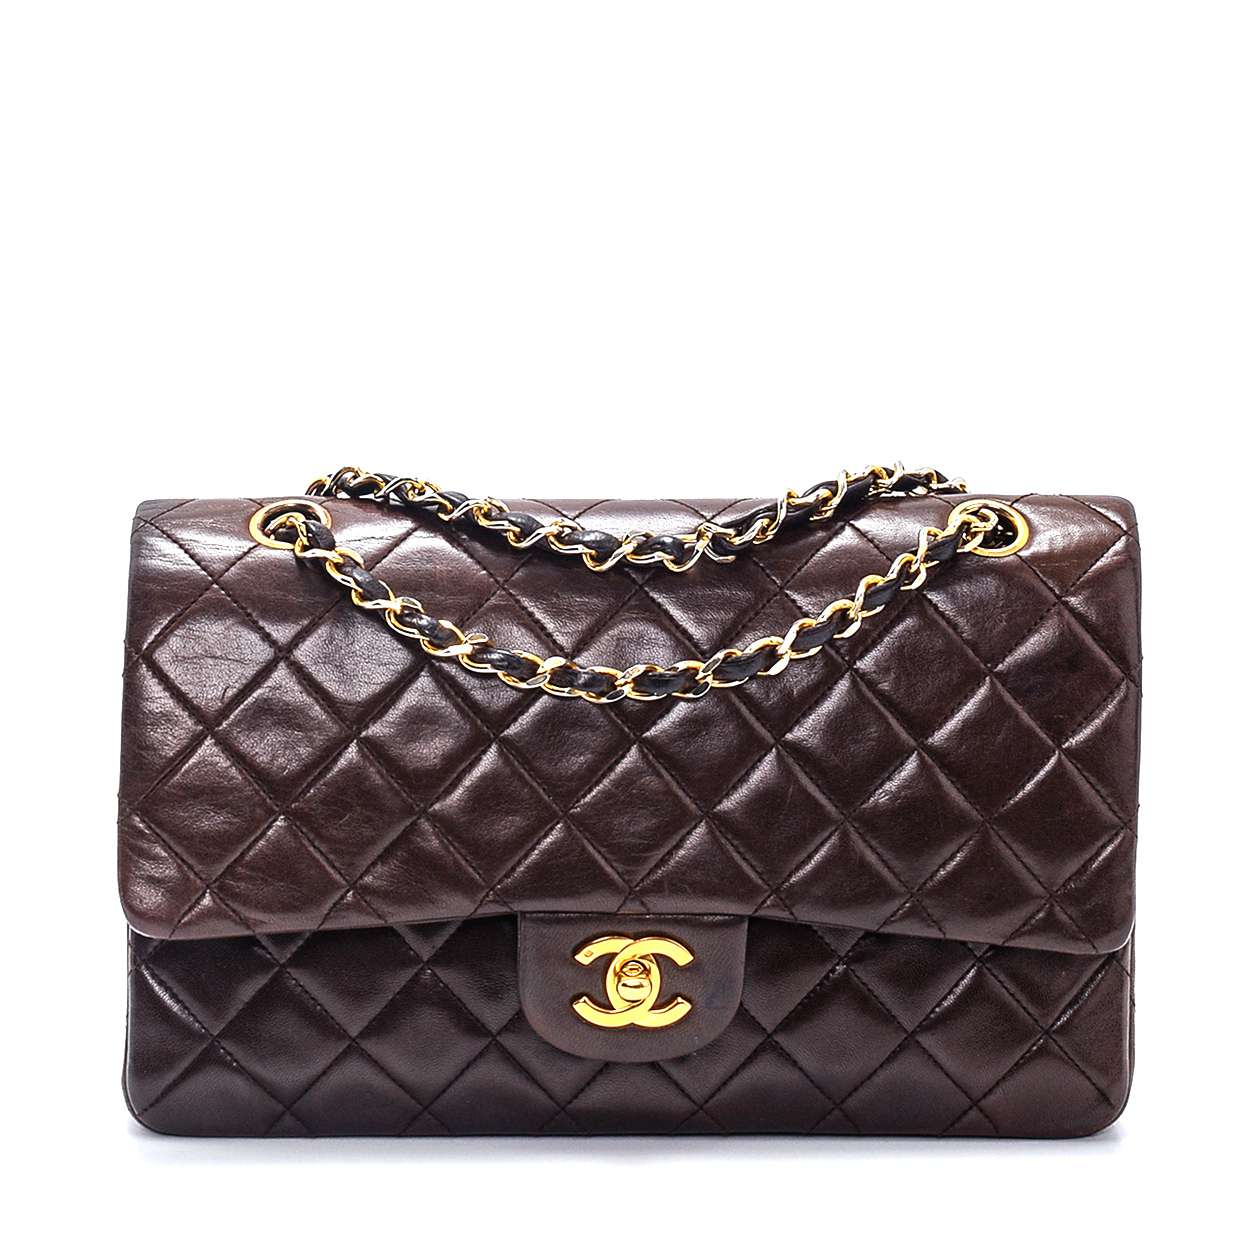 Chanel - Brown Quilted Lambskin Leather Vintage 2.55 Double Flap Bag 